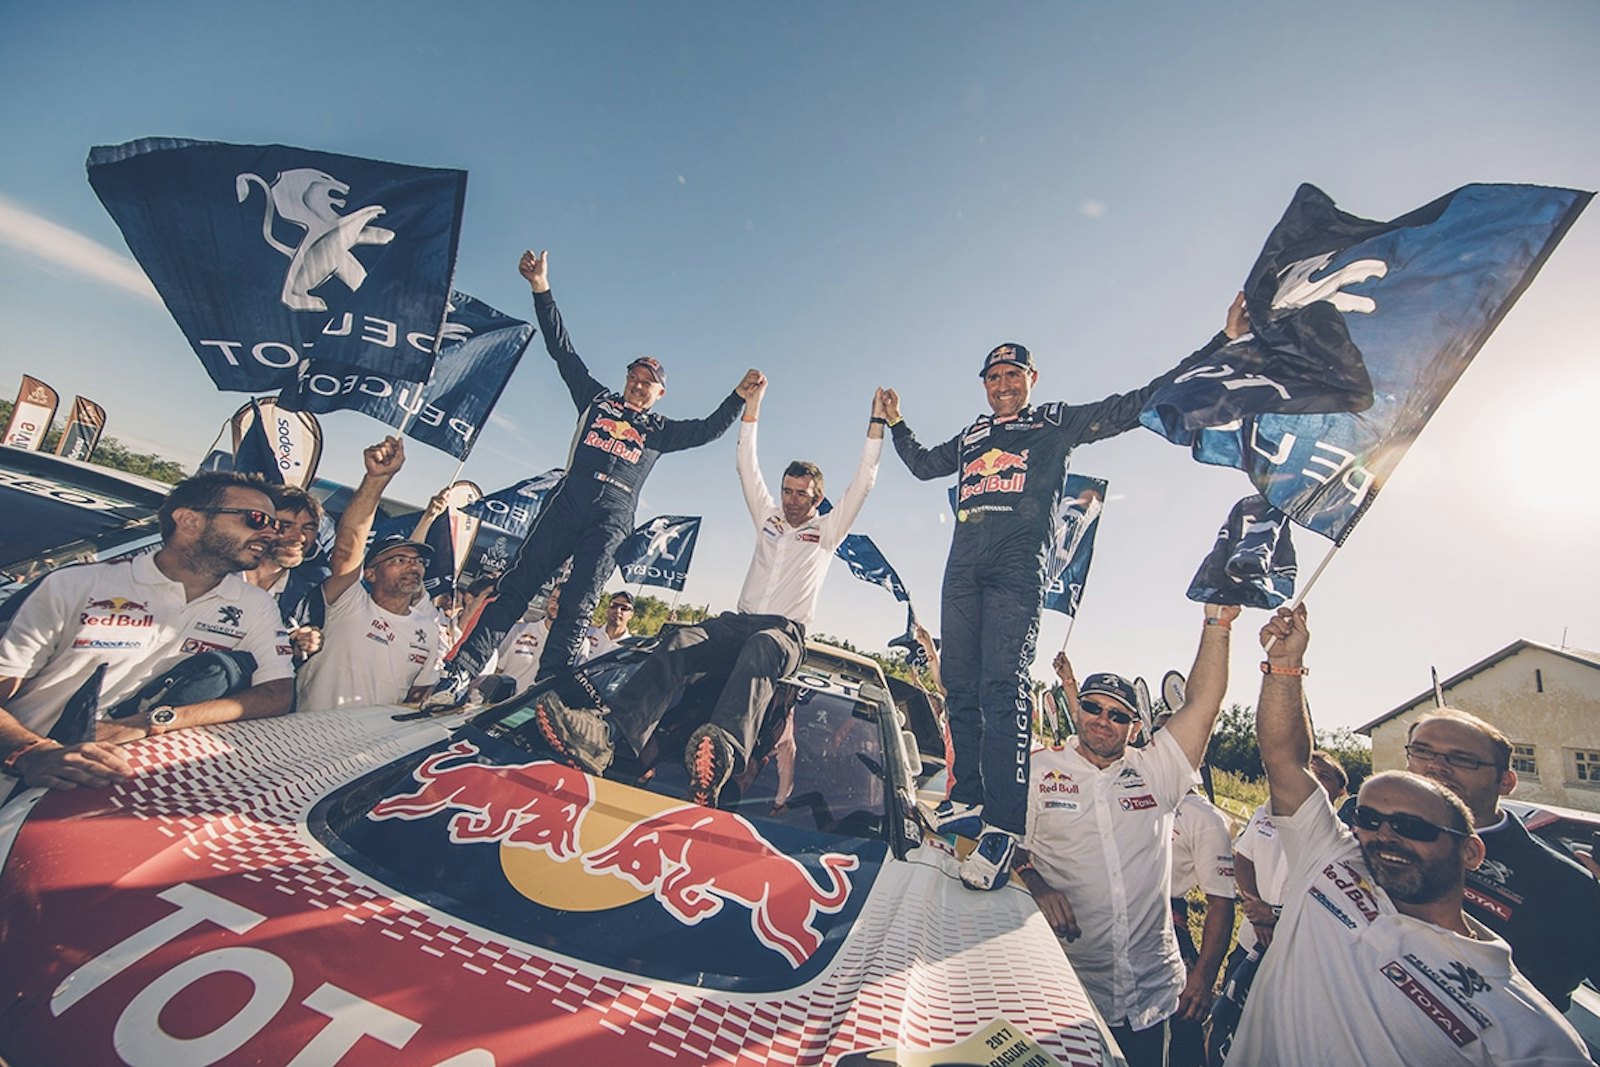 Stephane Peterhansel, Jean Paul Cottret and Bruno Famin (FRA) of Team Peugeot TOTAL at the finish line of stage 12 of Rally Dakar 2017 from Rio Cuarto to Buenos Aires, Argentina on January 14, 2017. // Flavien Duhamel/Red Bull Content Pool // P-20170114-00166 // Usage for editorial use only // Please go to www.redbullcontentpool.com for further information. //